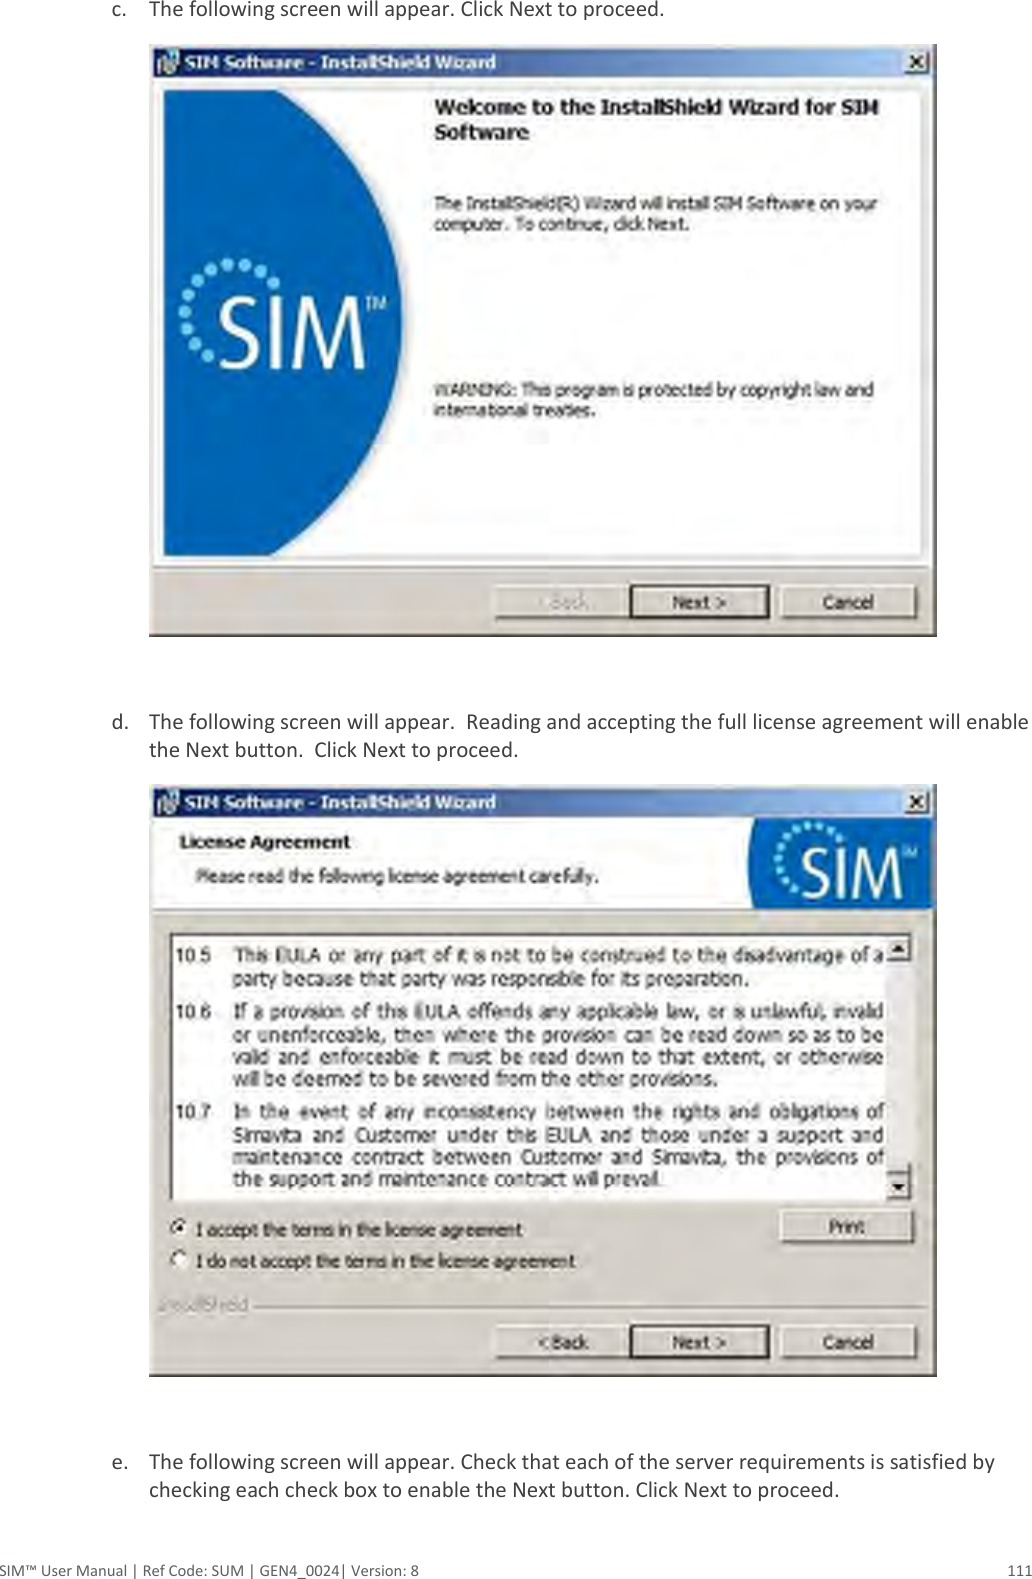  SIM™ User Manual | Ref Code: SUM | GEN4_0024| Version: 8  111 c. The following screen will appear. Click Next to proceed.    d. The following screen will appear.  Reading and accepting the full license agreement will enable the Next button.  Click Next to proceed.   e. The following screen will appear. Check that each of the server requirements is satisfied by checking each check box to enable the Next button. Click Next to proceed. 